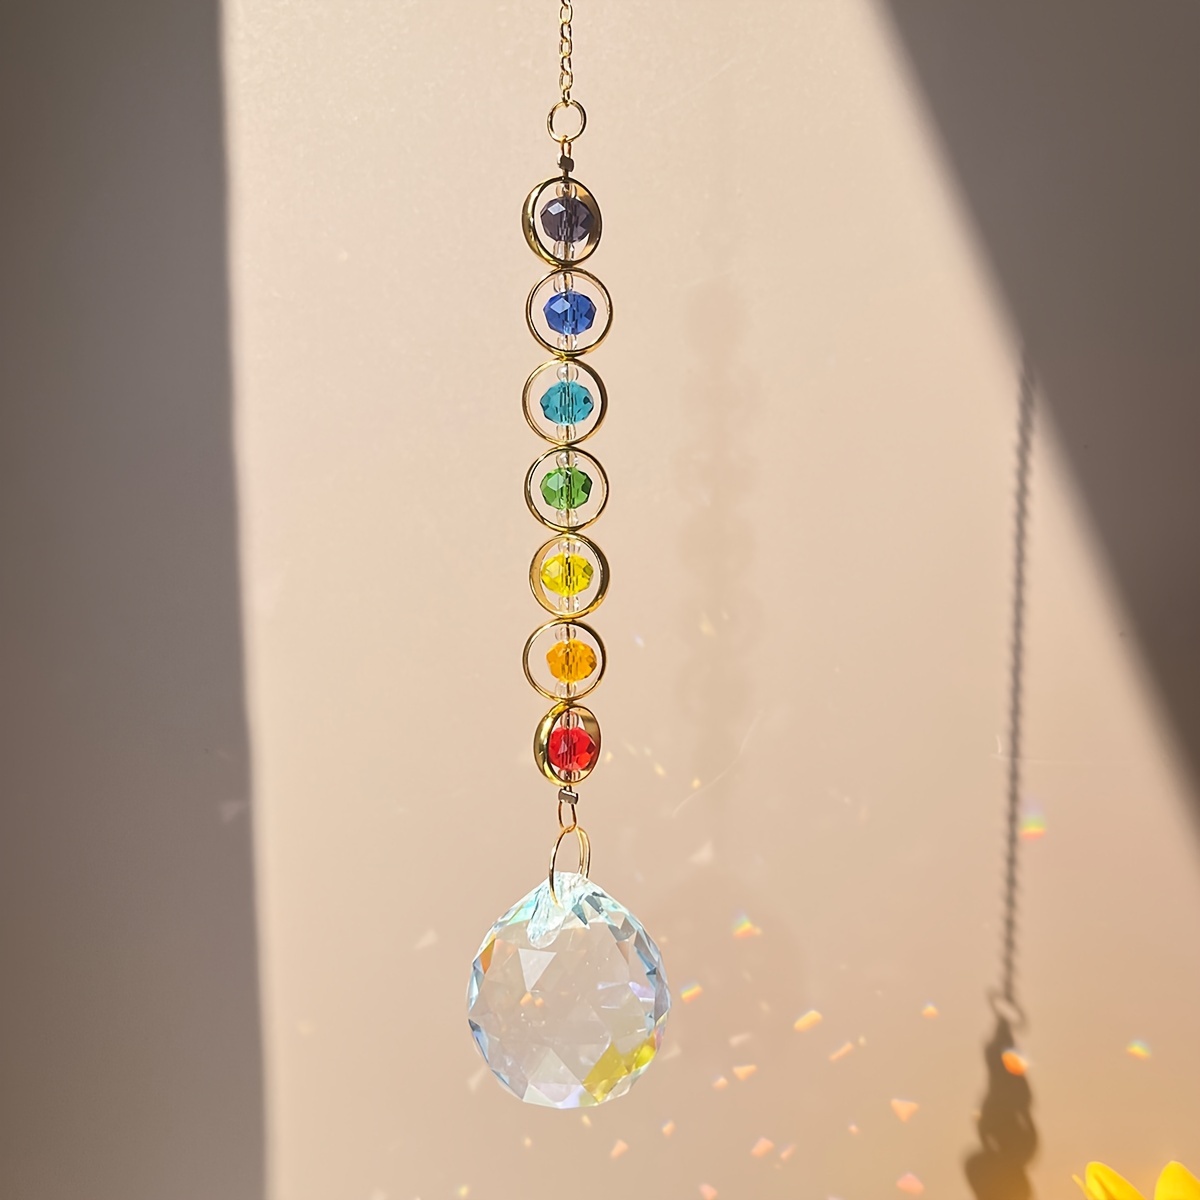 

1pc Glass Crystal Sun Catcher Rainbow Maker Prism With Hanging Chain For Thanksgiving Home Decor - Reflective Suncatcher Pendant With Colorful Beads, No Electricity Required